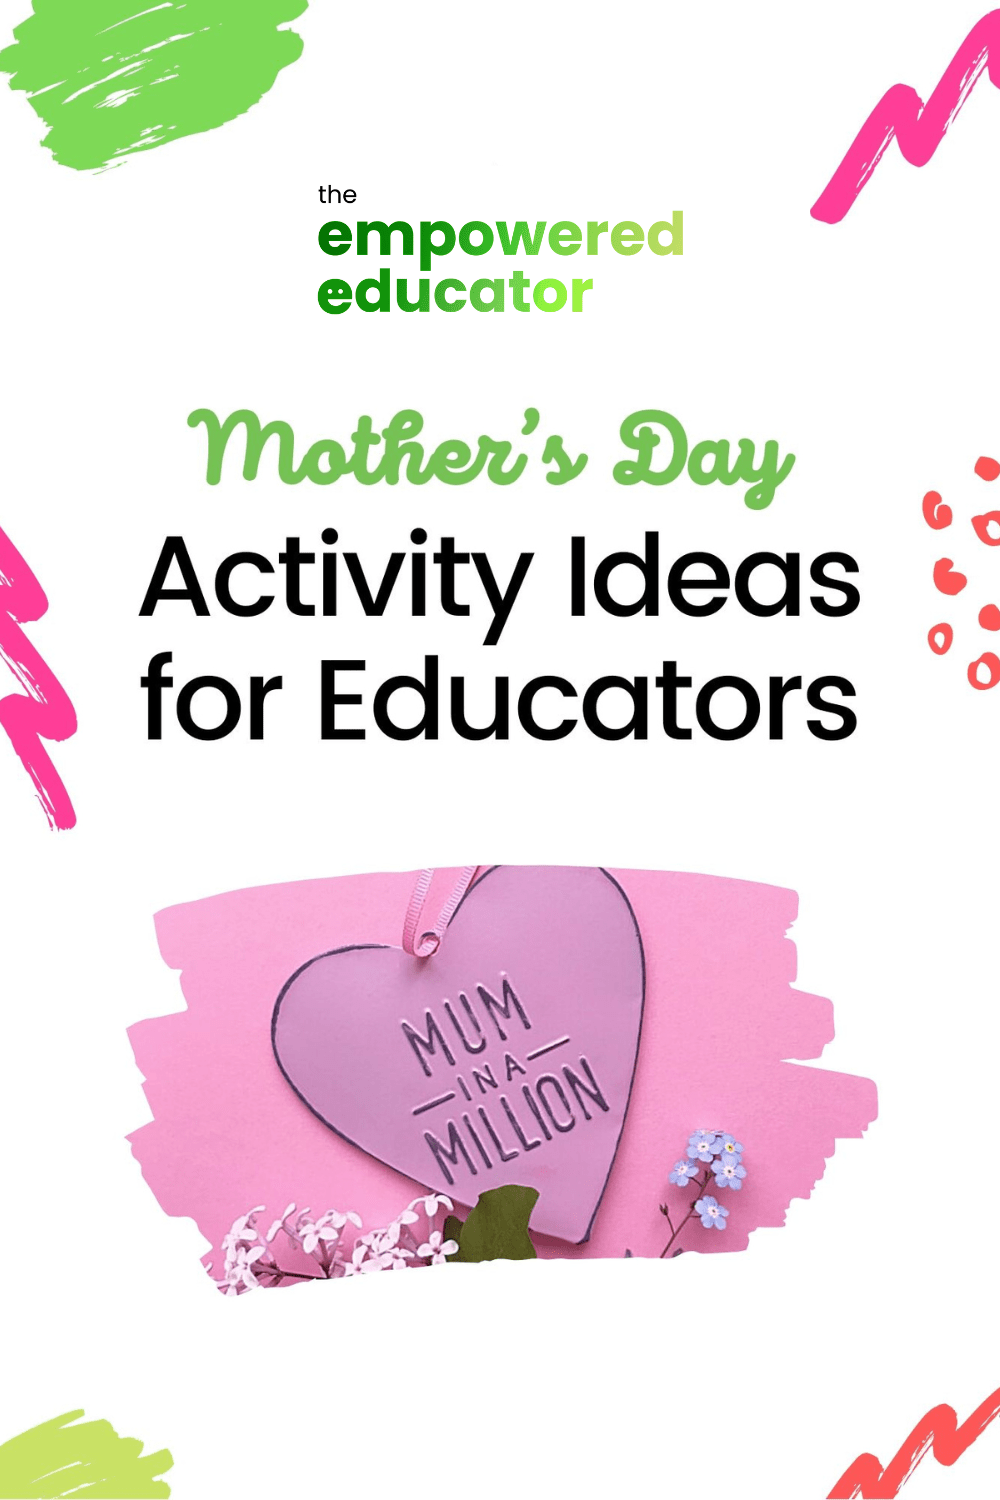 mother's day activity ideas